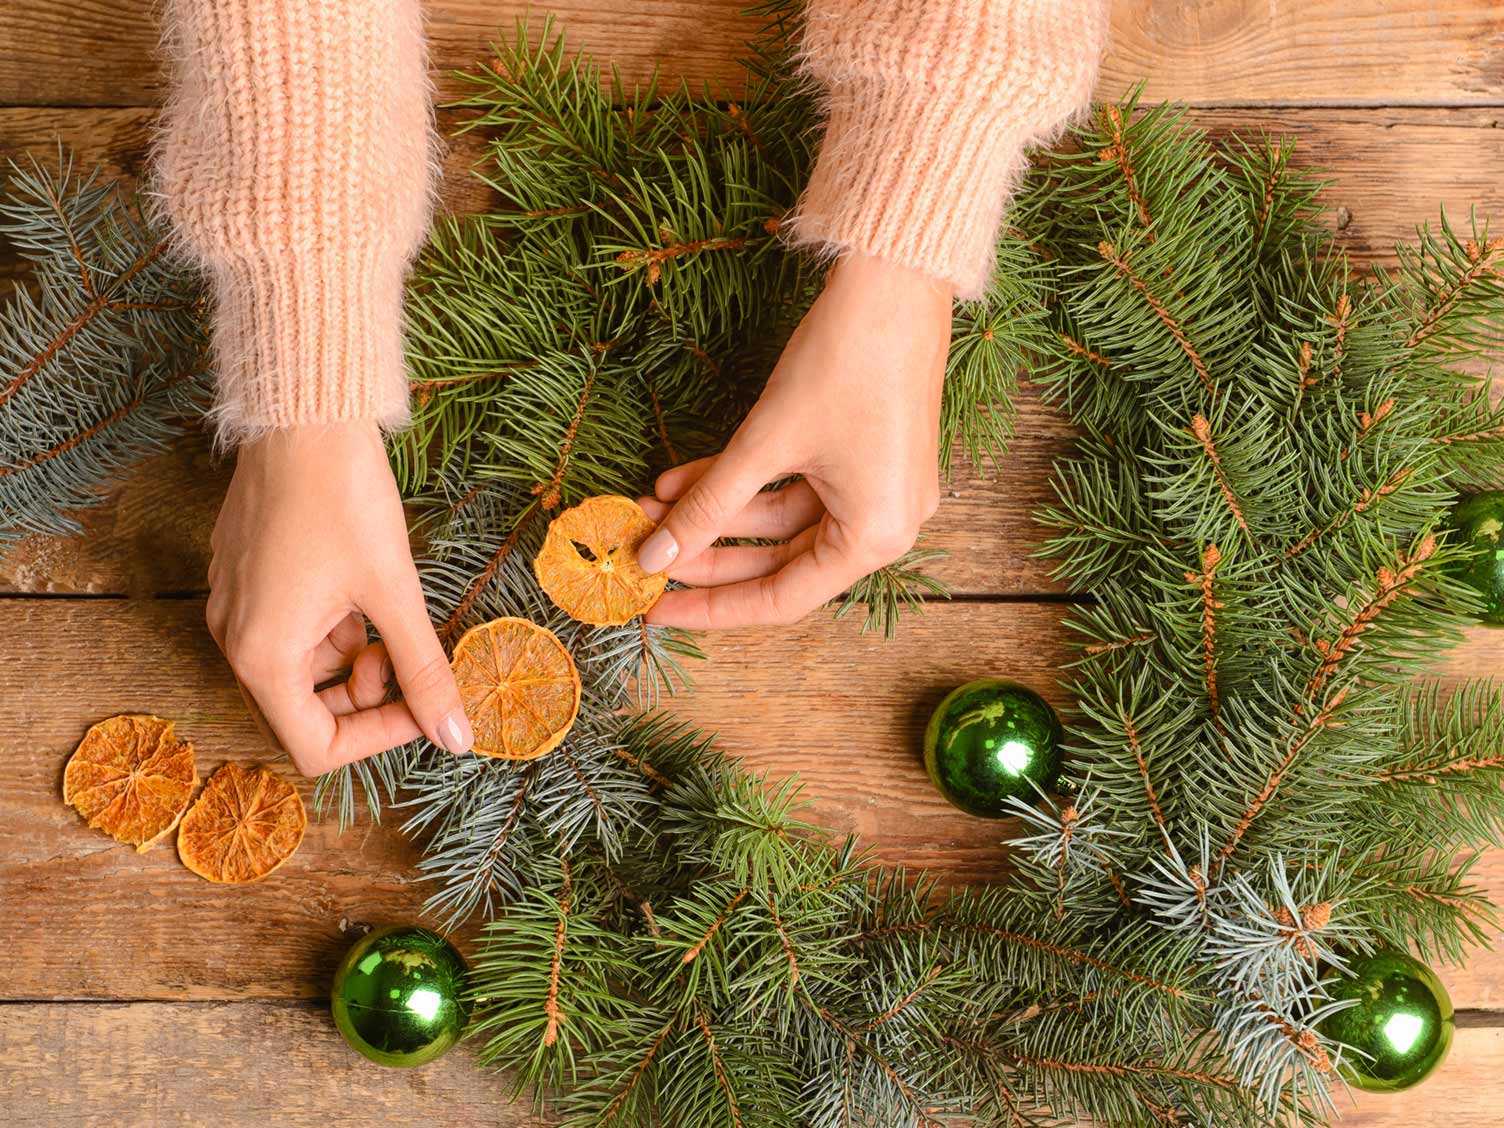 Decorating the Christmas wreath with dried citrus fruits